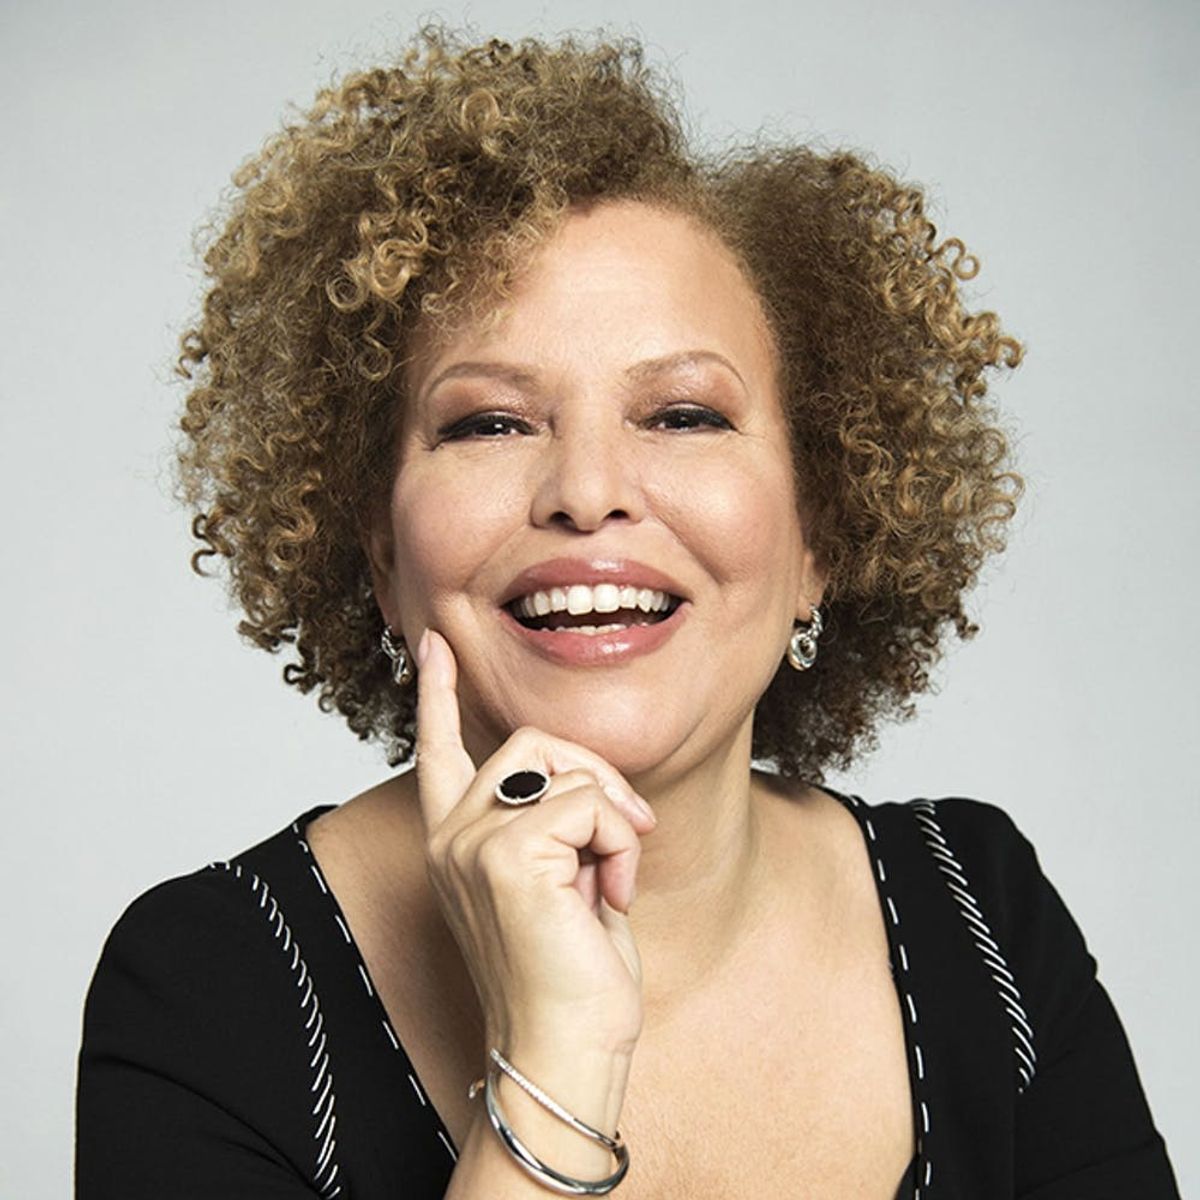 BET Networks Chairman & CEO Debra L. Lee on Why There’s a Diversity Problem in Entertainment